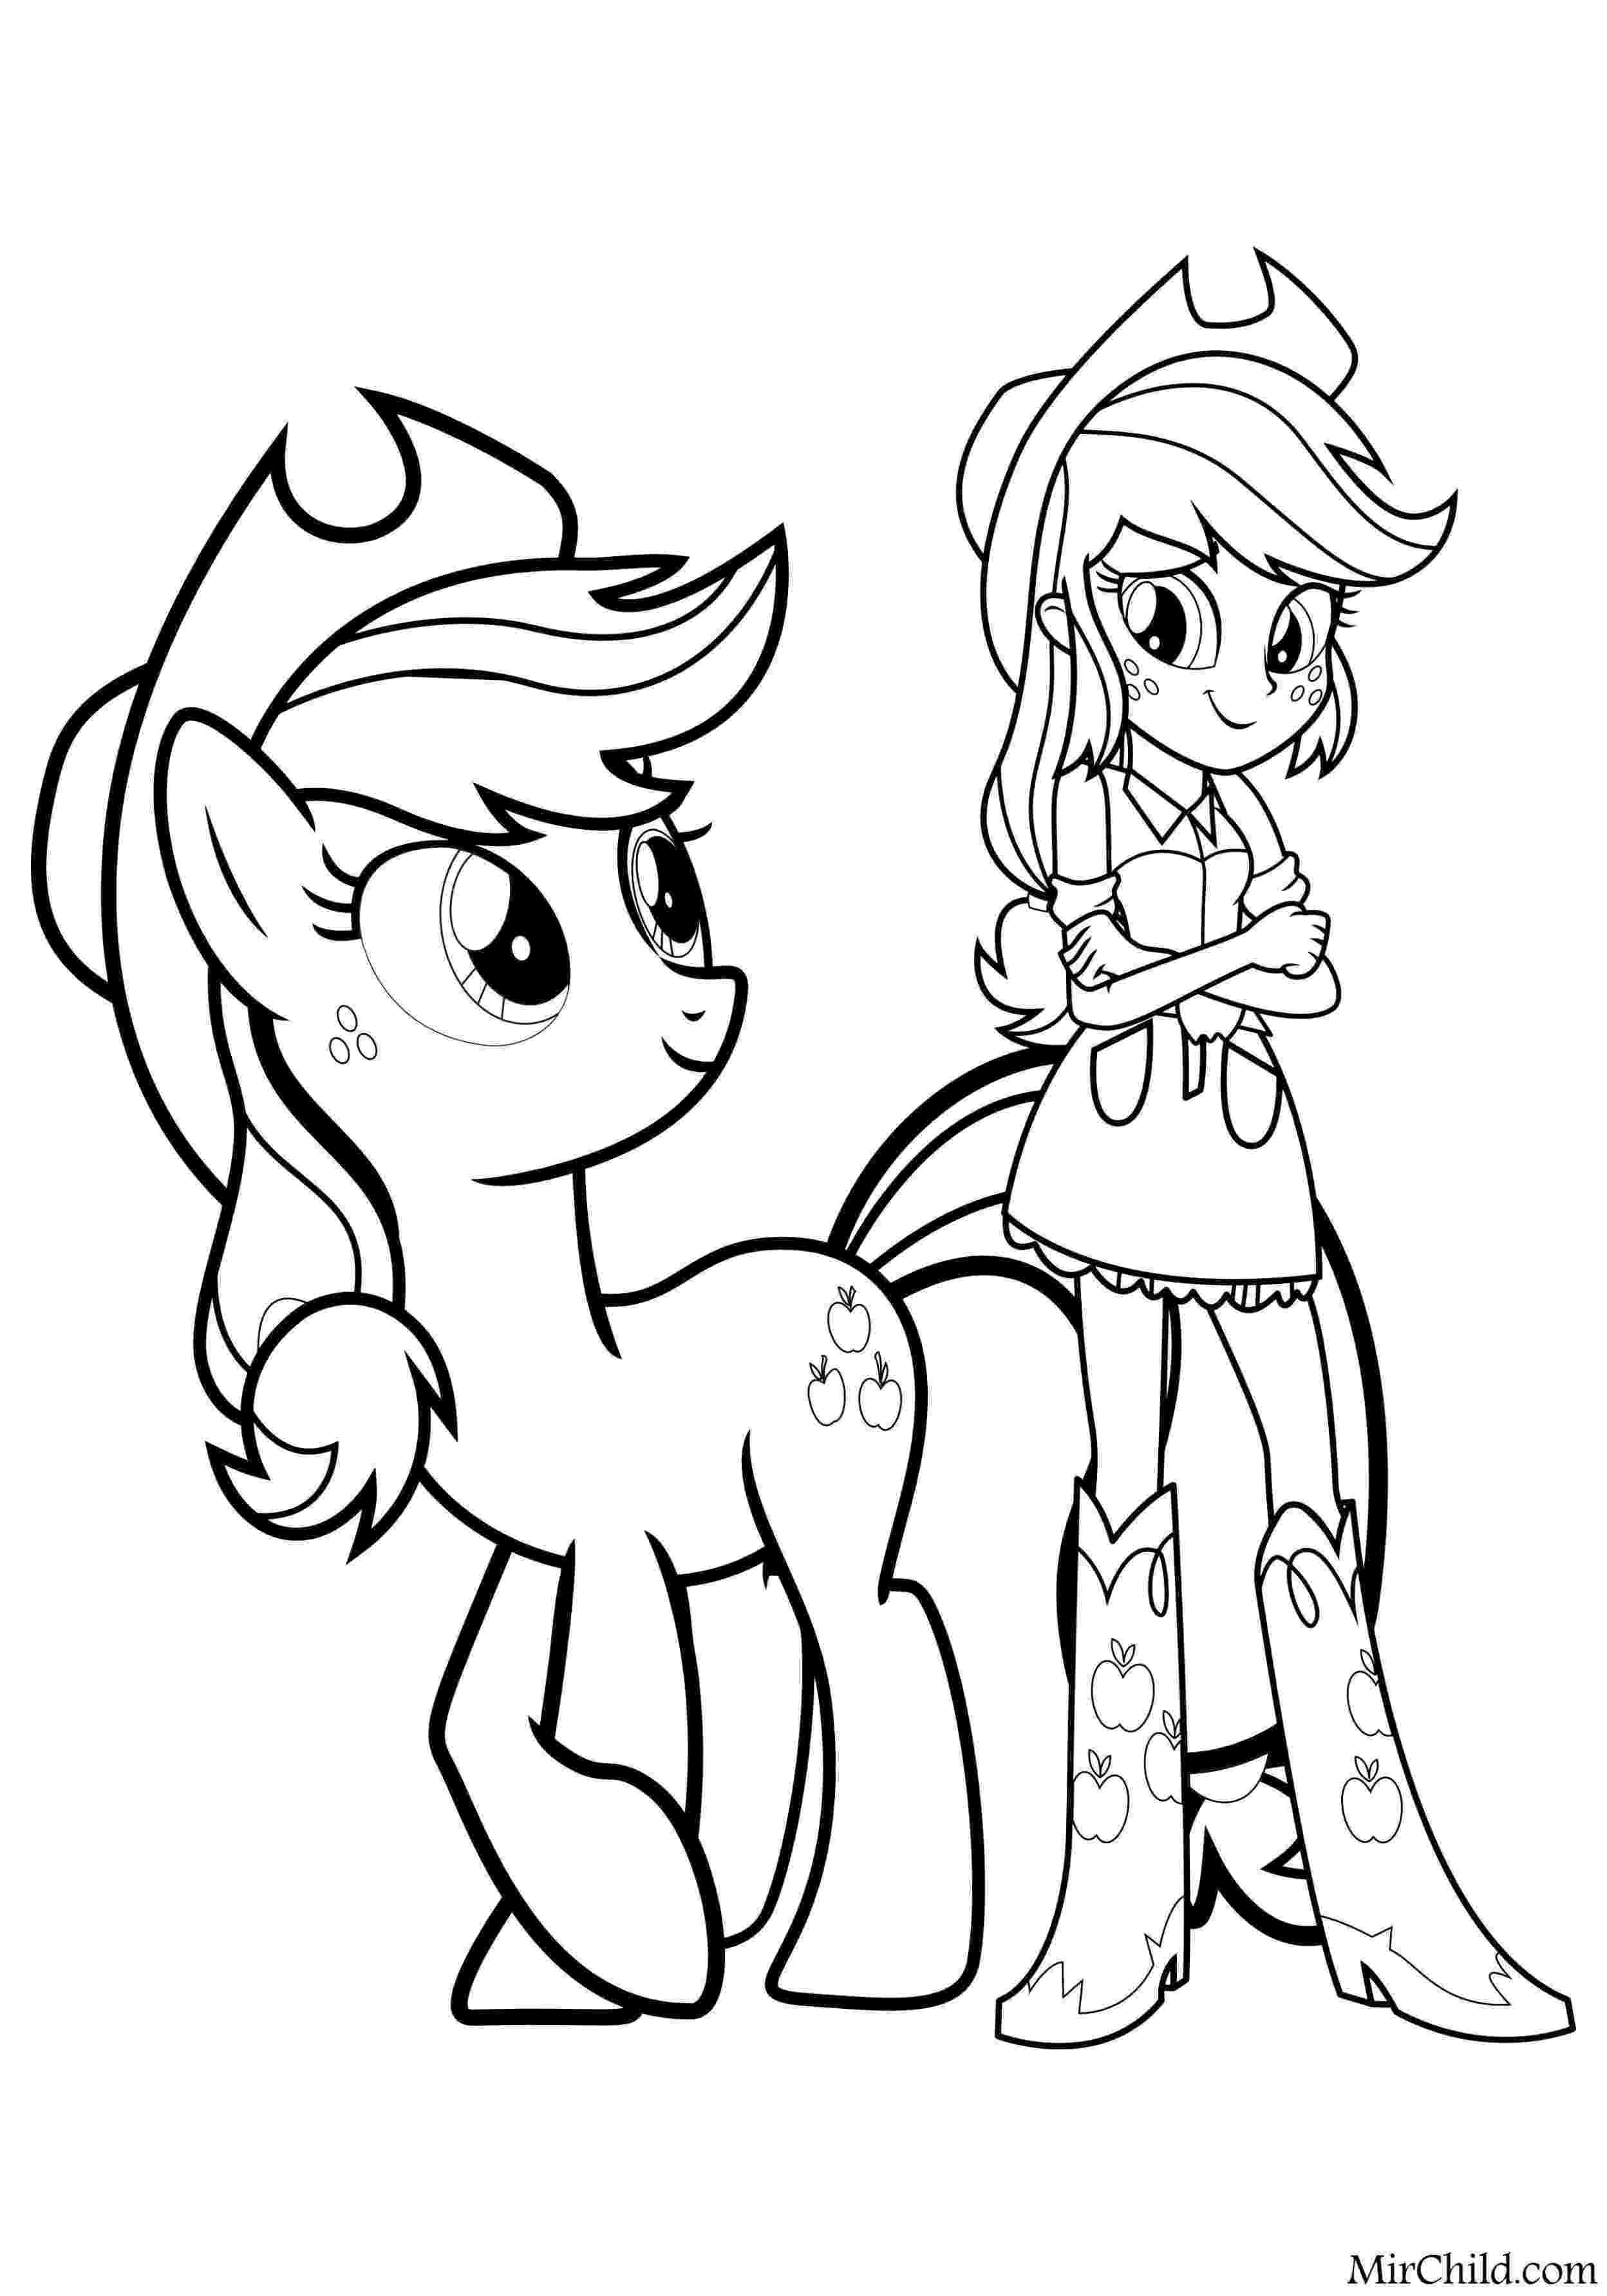 my little pony pages my little pony coloring pages free bestappsforkidscom little my pony pages 